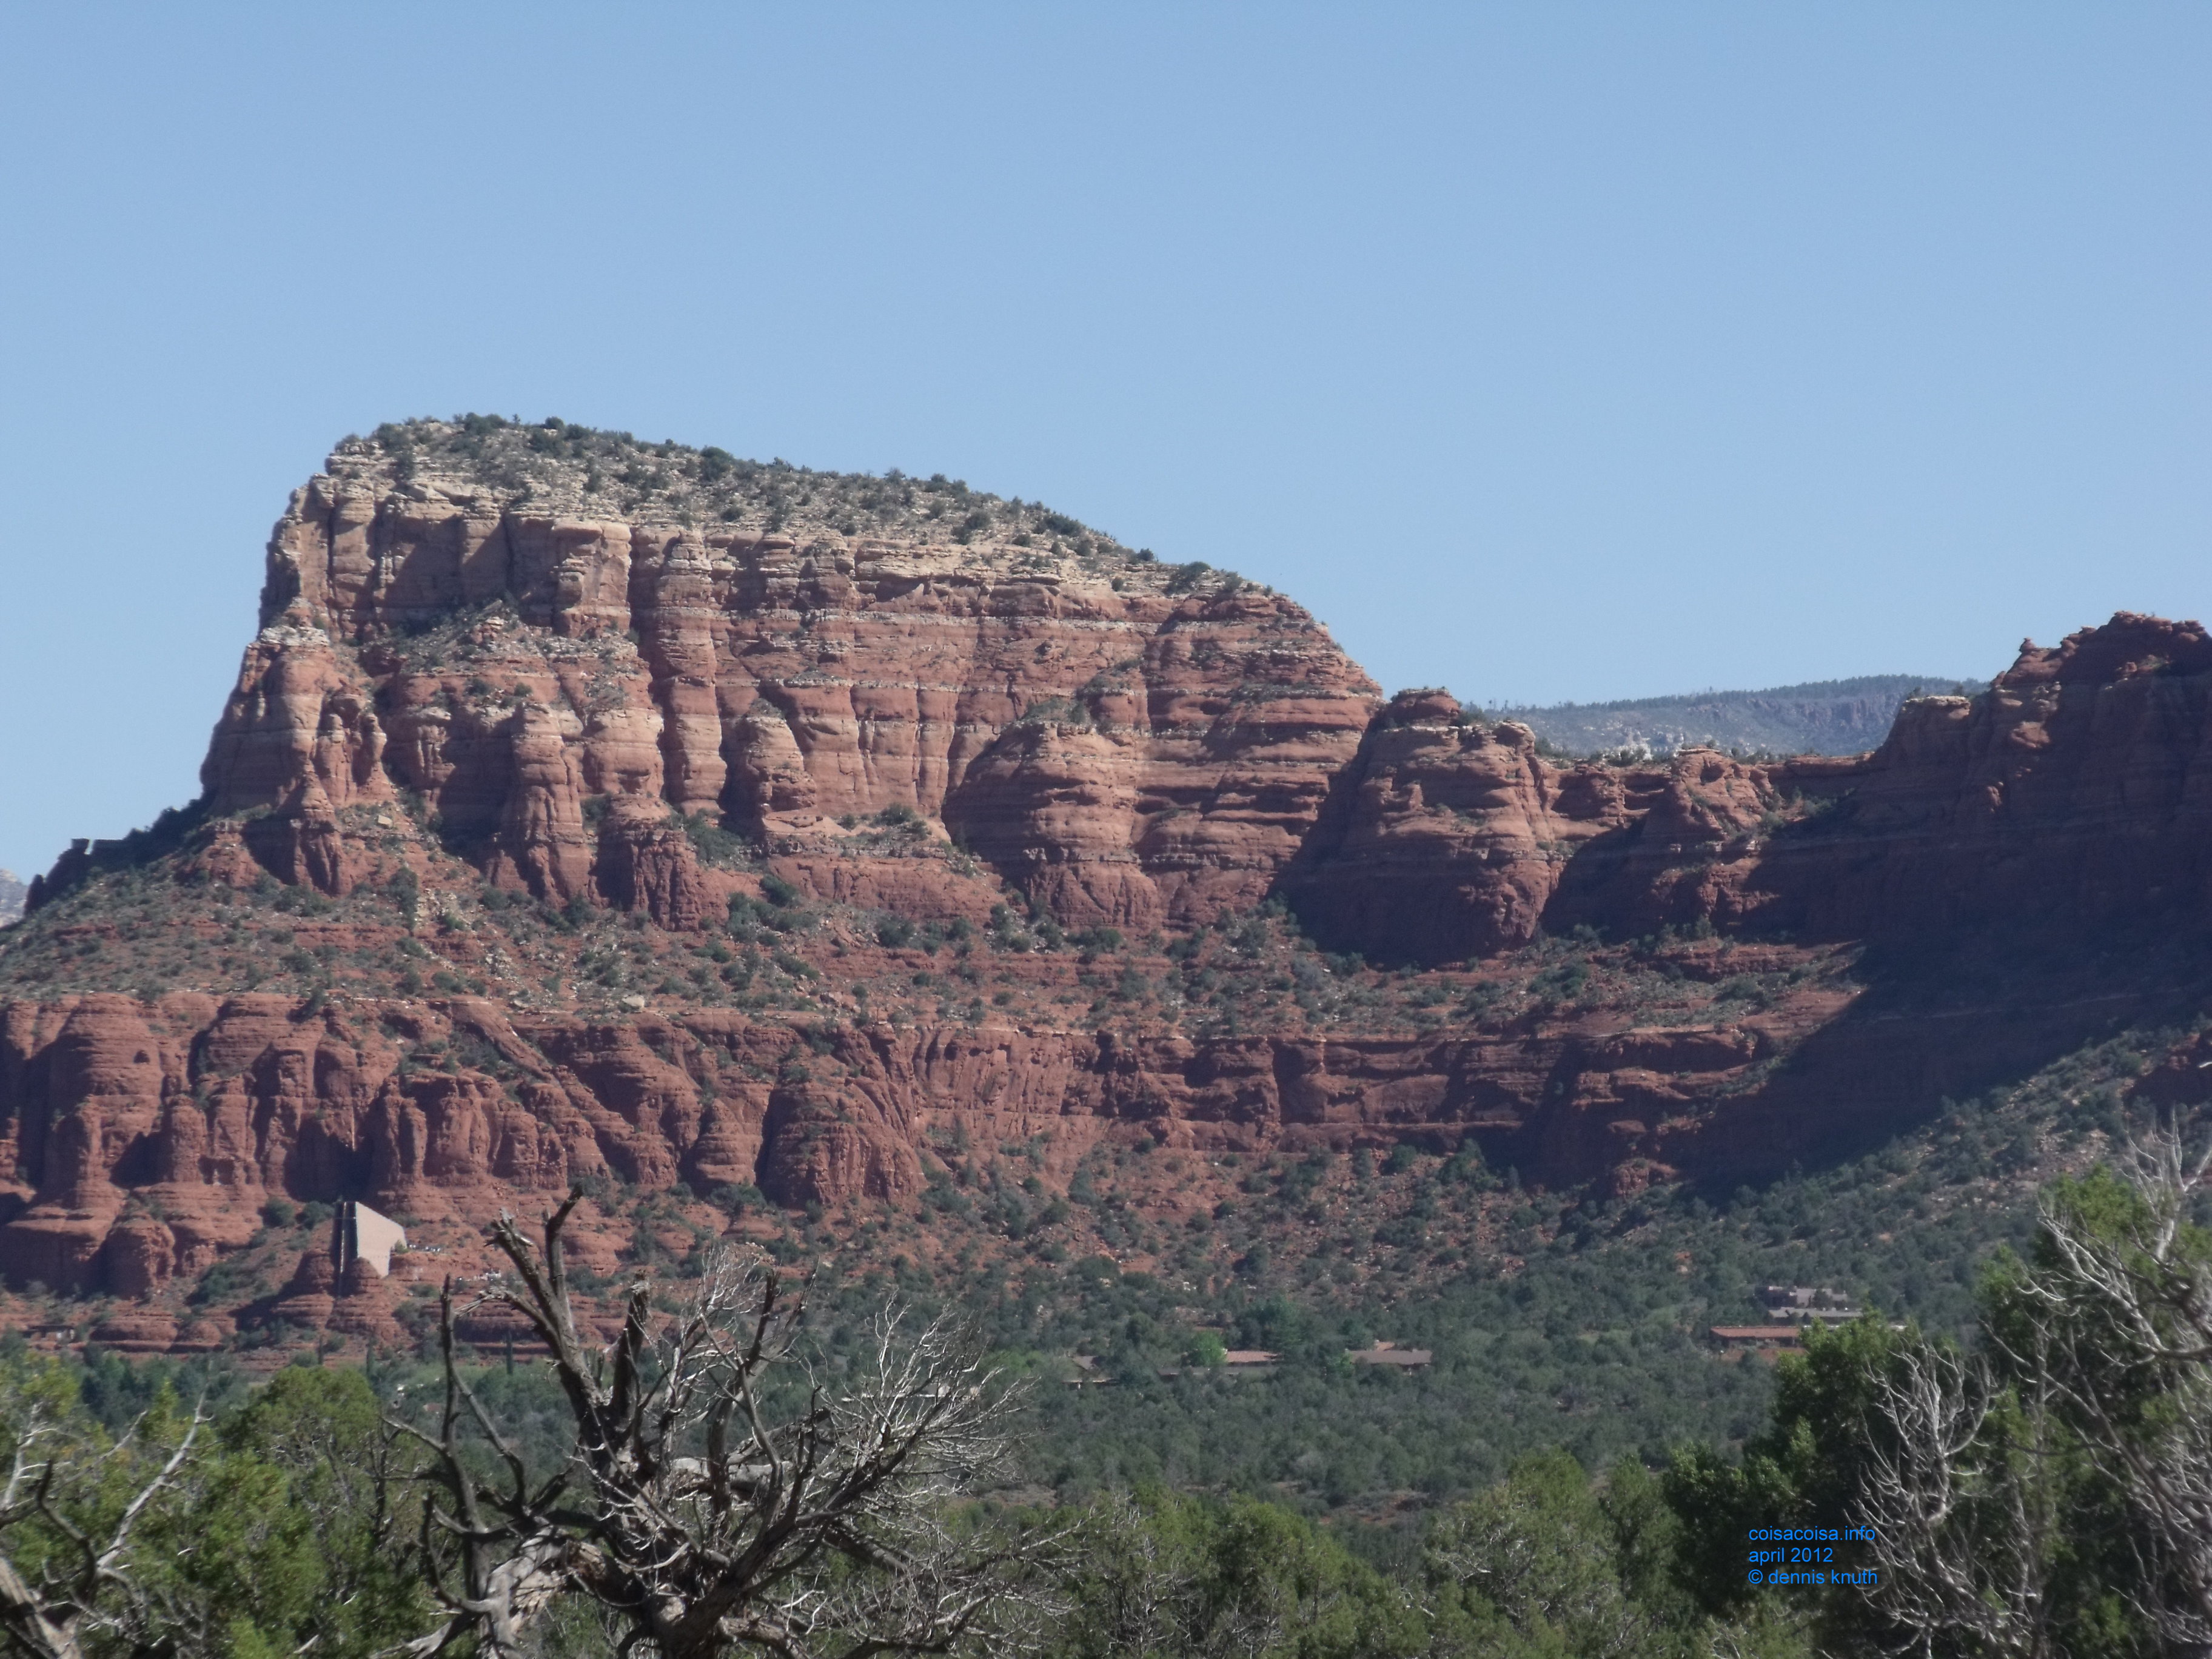 Homes in Sedona near a red rock bluff